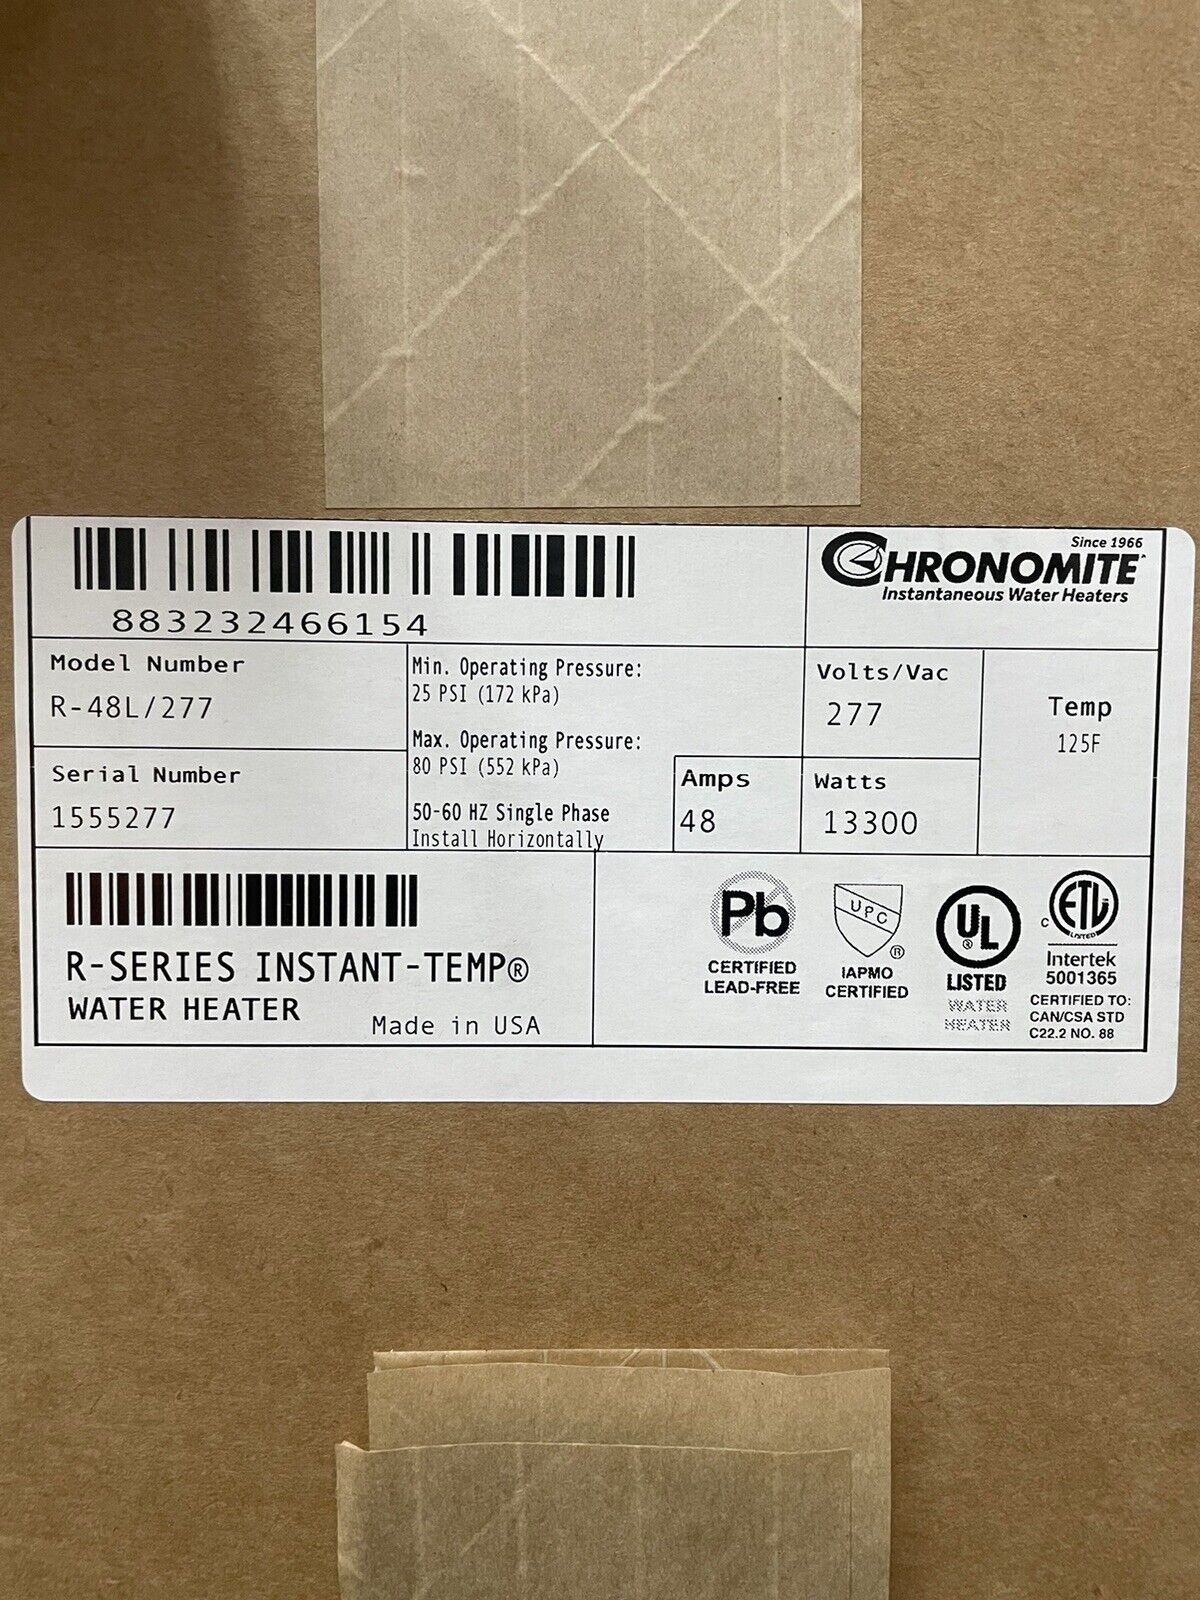 CHRONOMITE LABS R-48L/277 Elect Tankless Water Heater, 48A, 277V, Voltage: 277